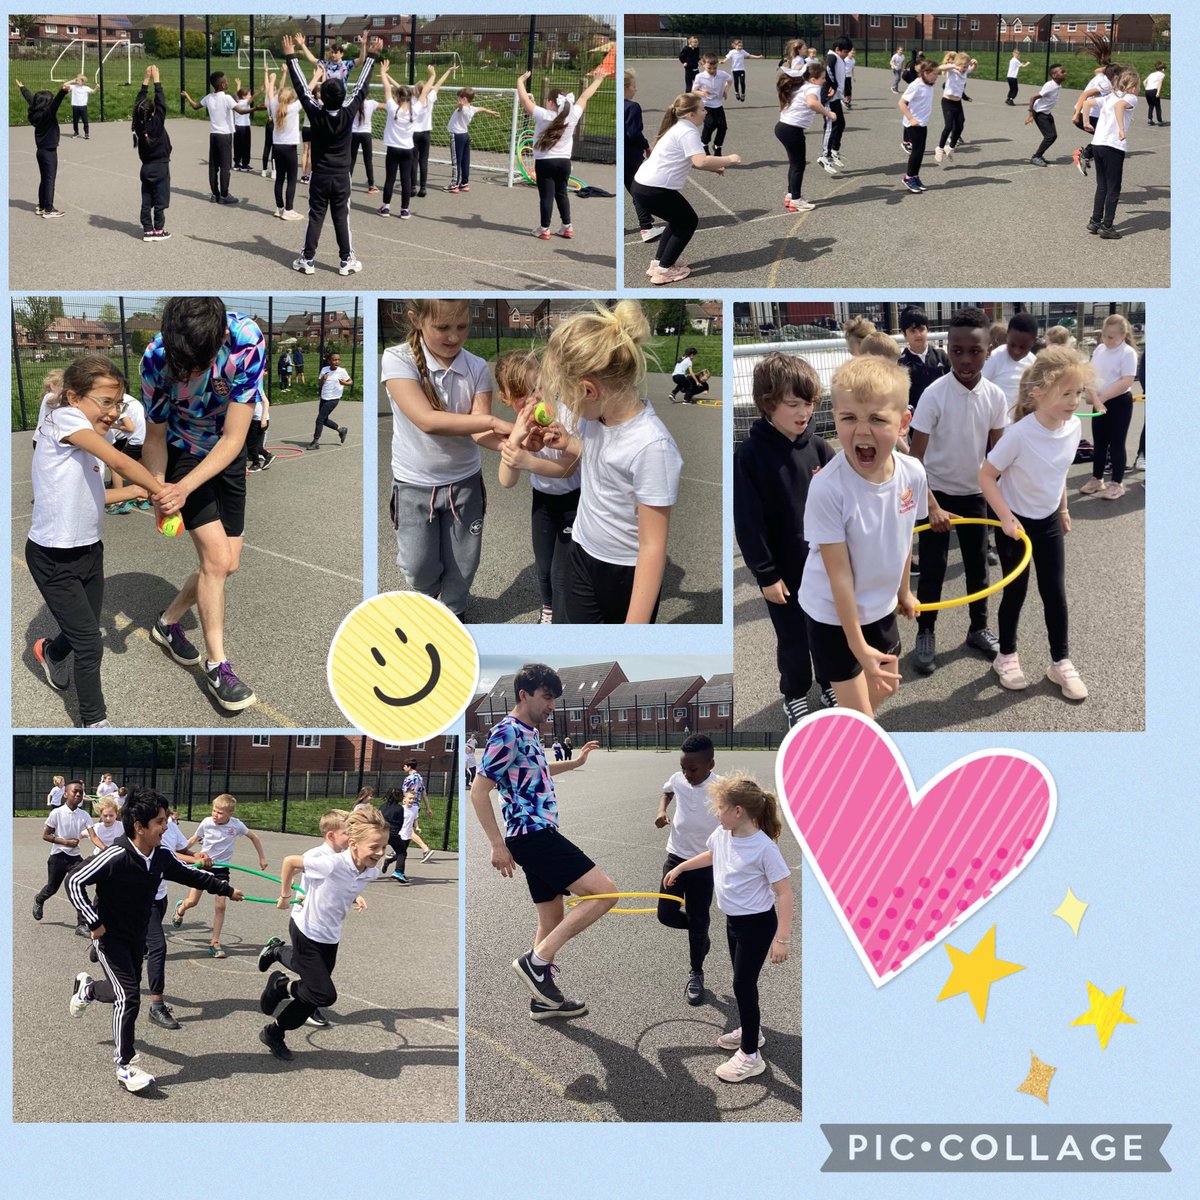 😍🤩 More fantastic fun and learning in Y3A’s PE lesson this week - all about fitness and teamwork! 🤩😍 @Inspire_Ashton @TrustVictorious @inspire_pe